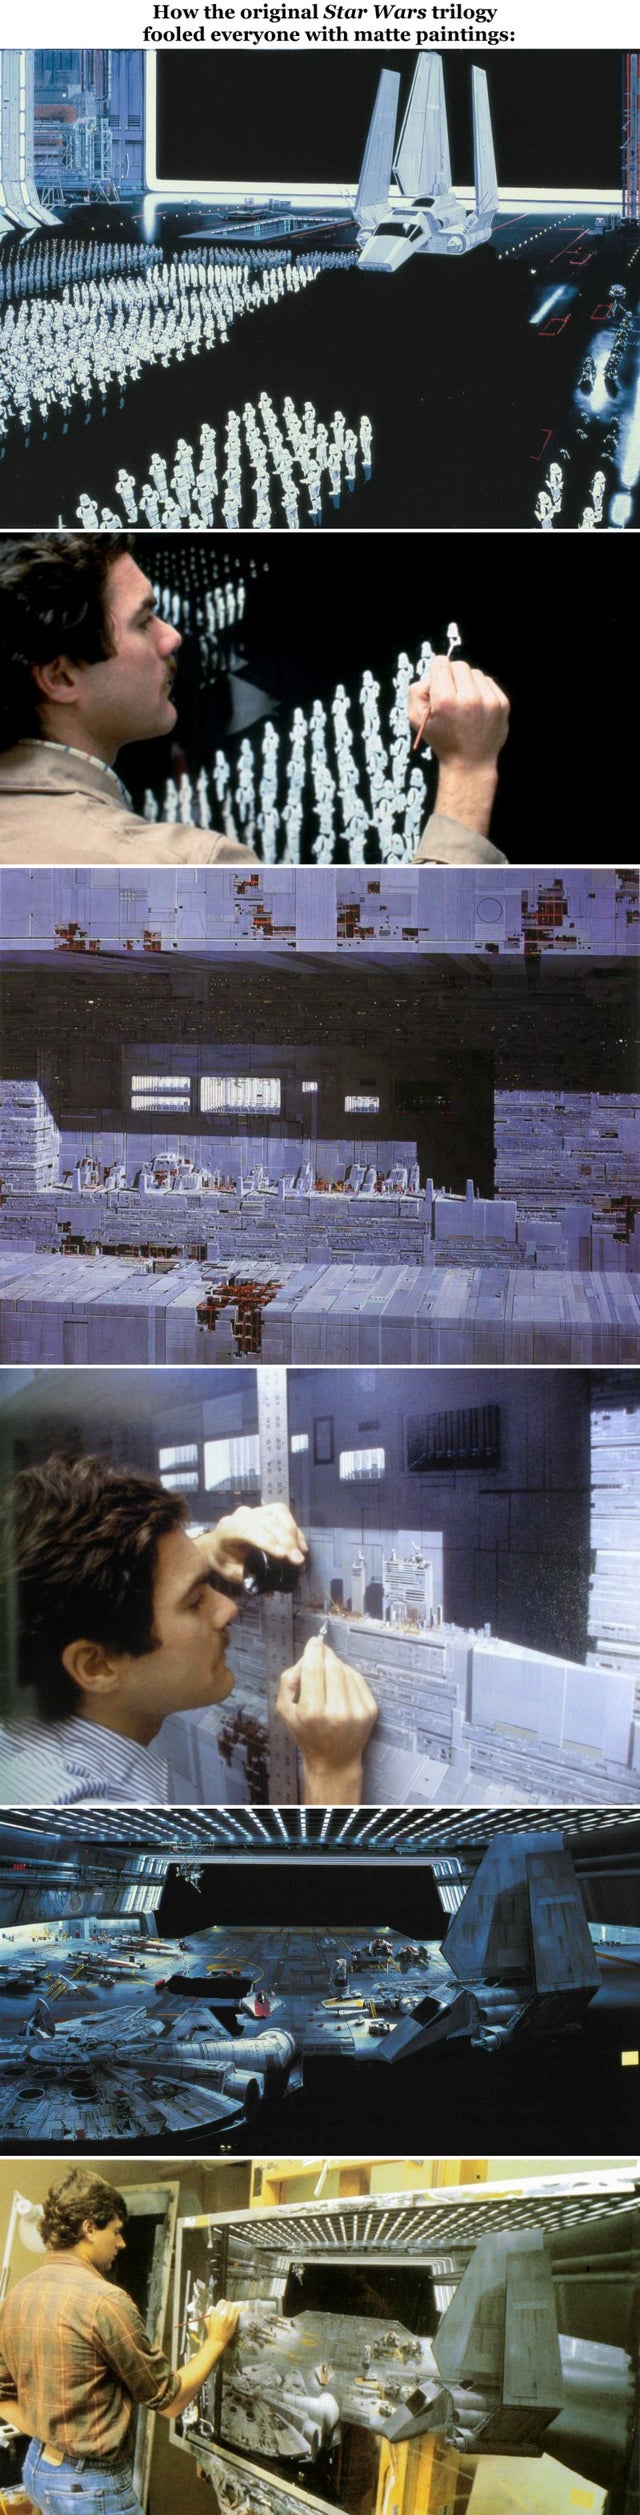 star wars matte painting - How the original Star Wars trilogy fooled everyone with matte paintings